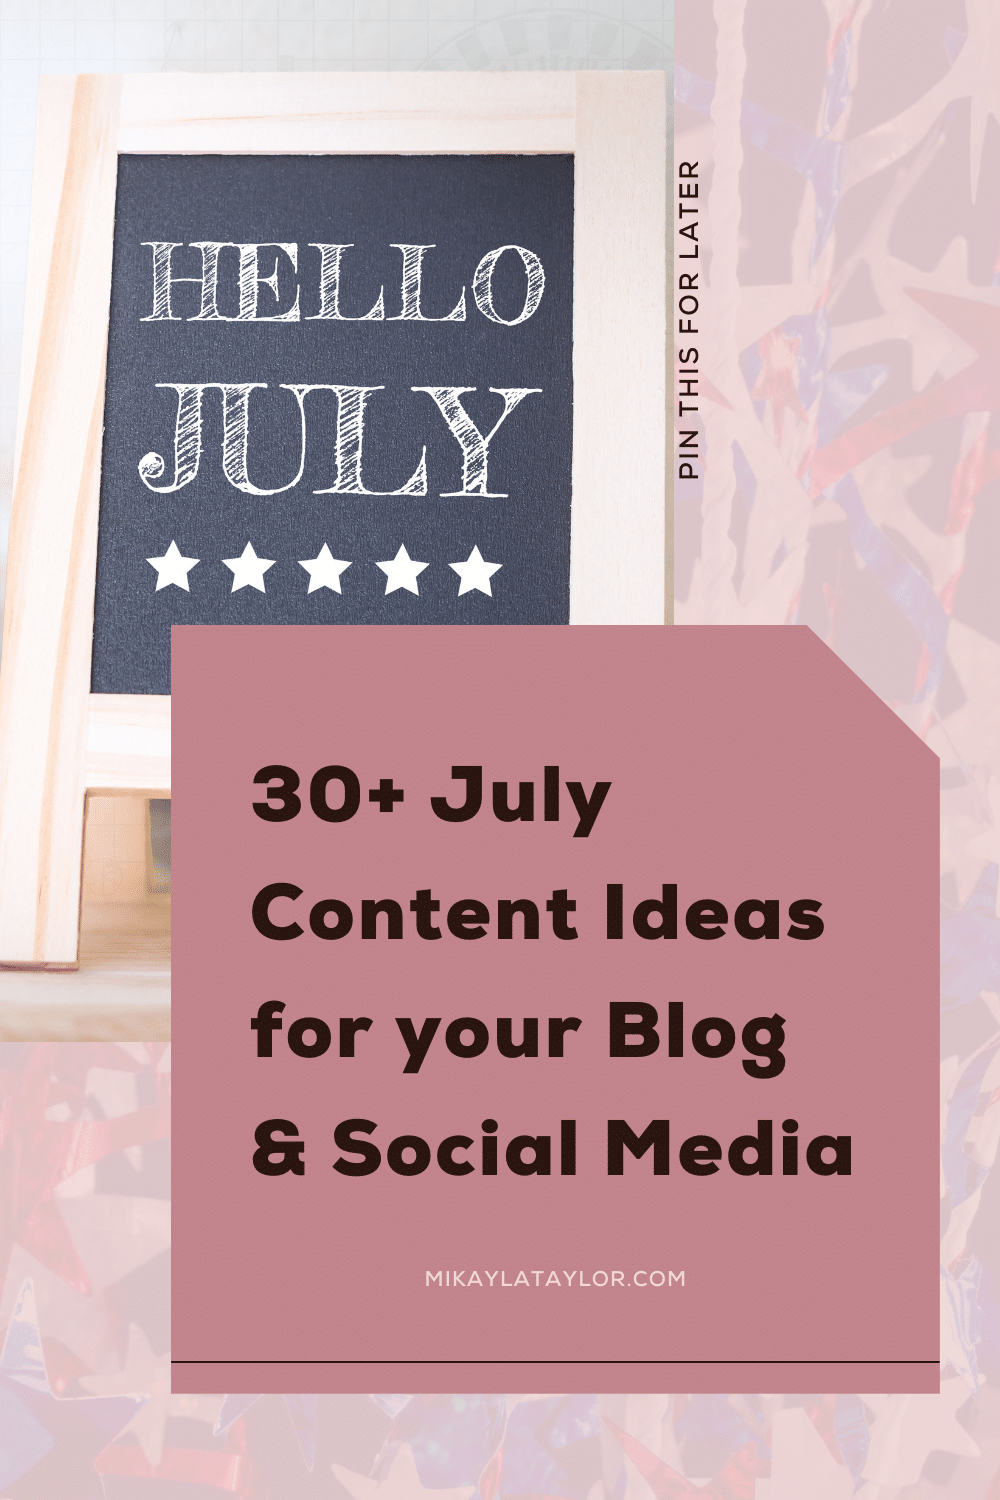 30+ July Content Ideas for Your Blog - use these ideas for your business mikaylataylor.com